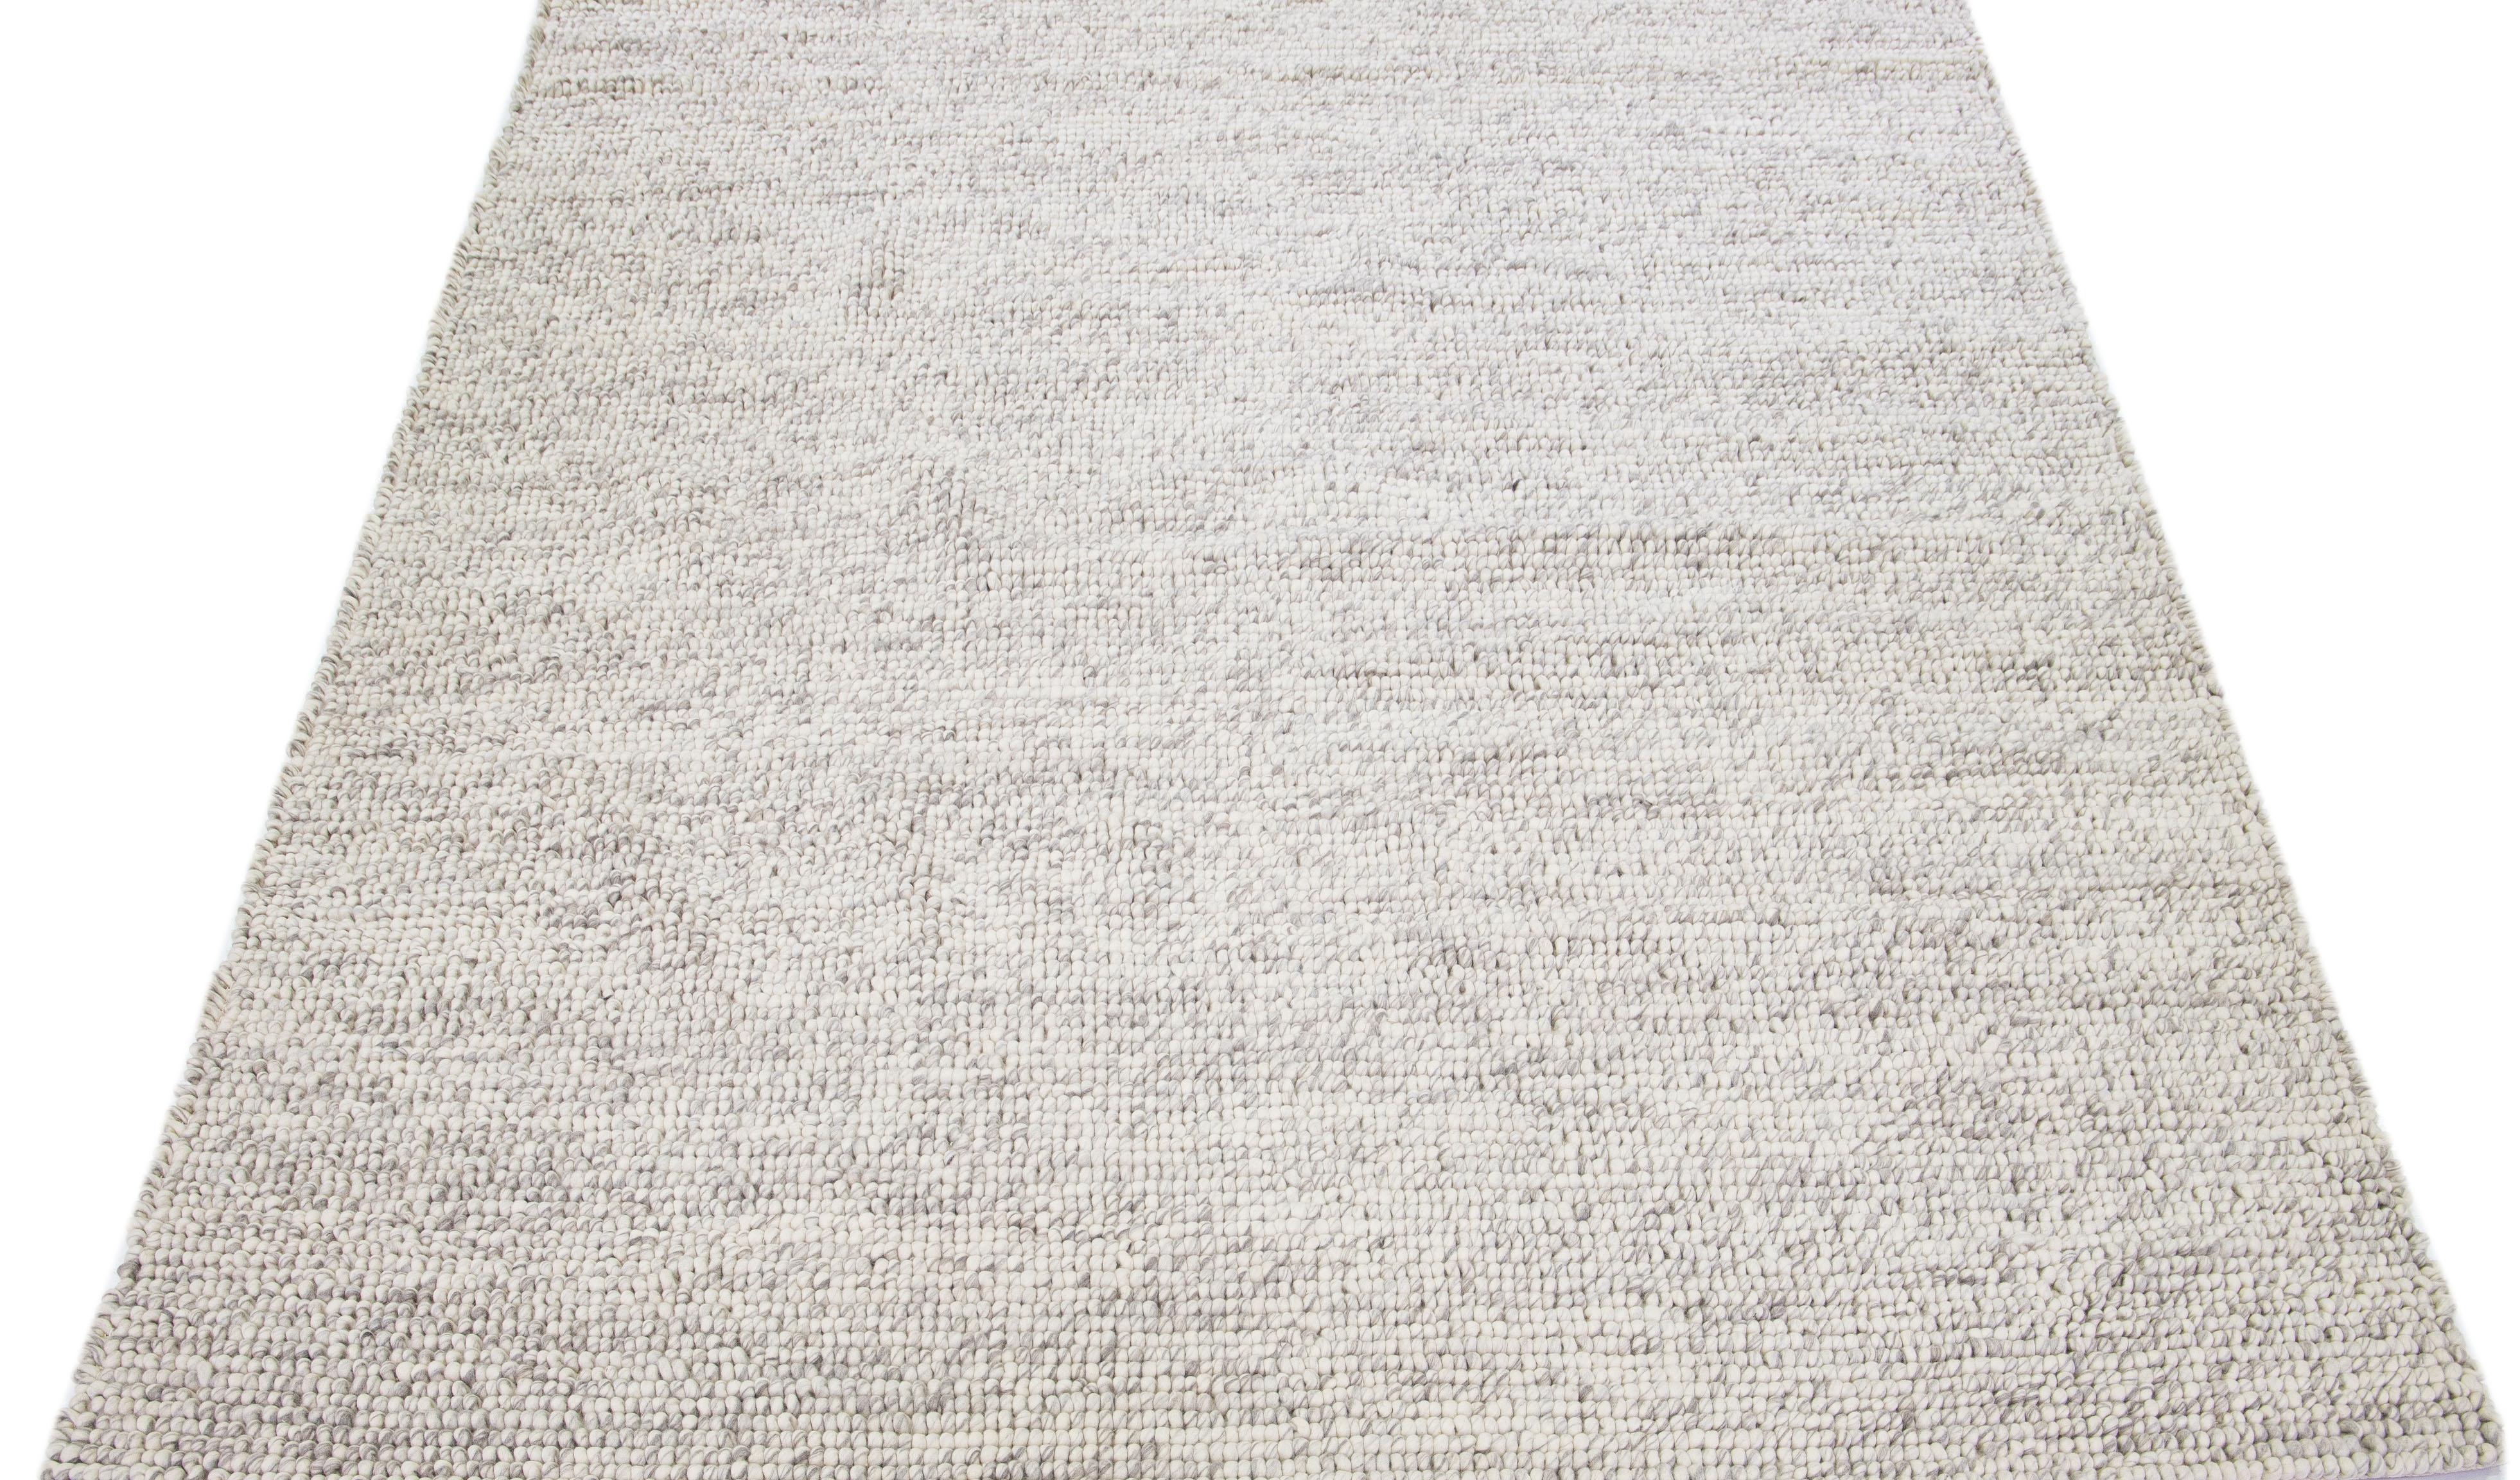  Modern Beige  Felted Textuted Wool Rug By Apadana In New Condition For Sale In Norwalk, CT